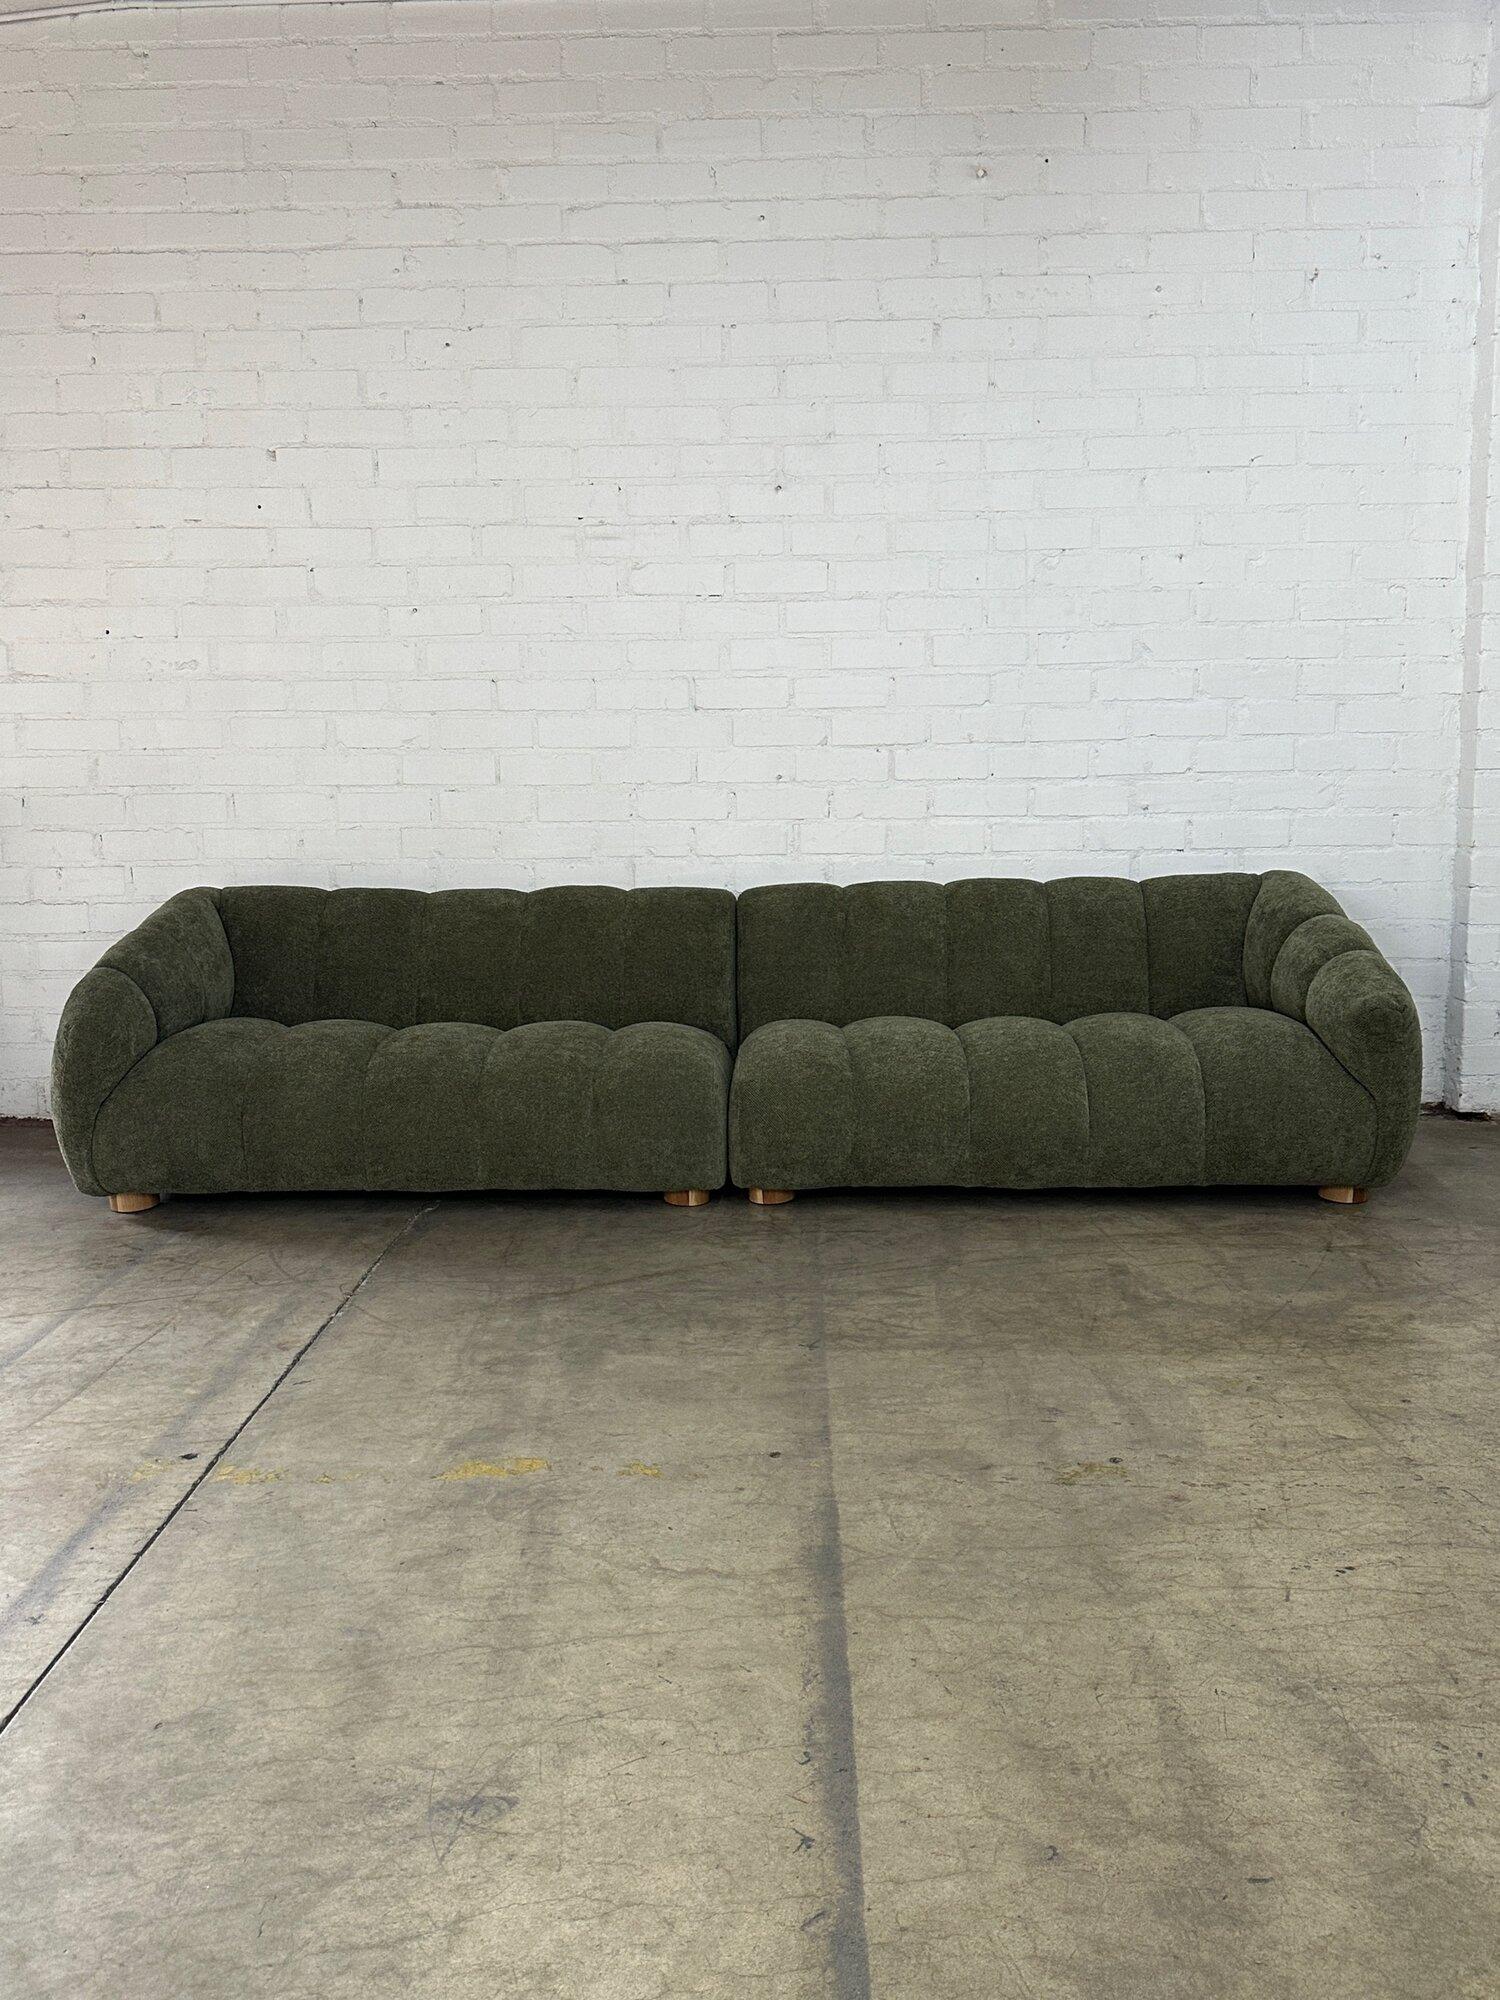 Organic Modern Low Profile Channel Sectional For Sale